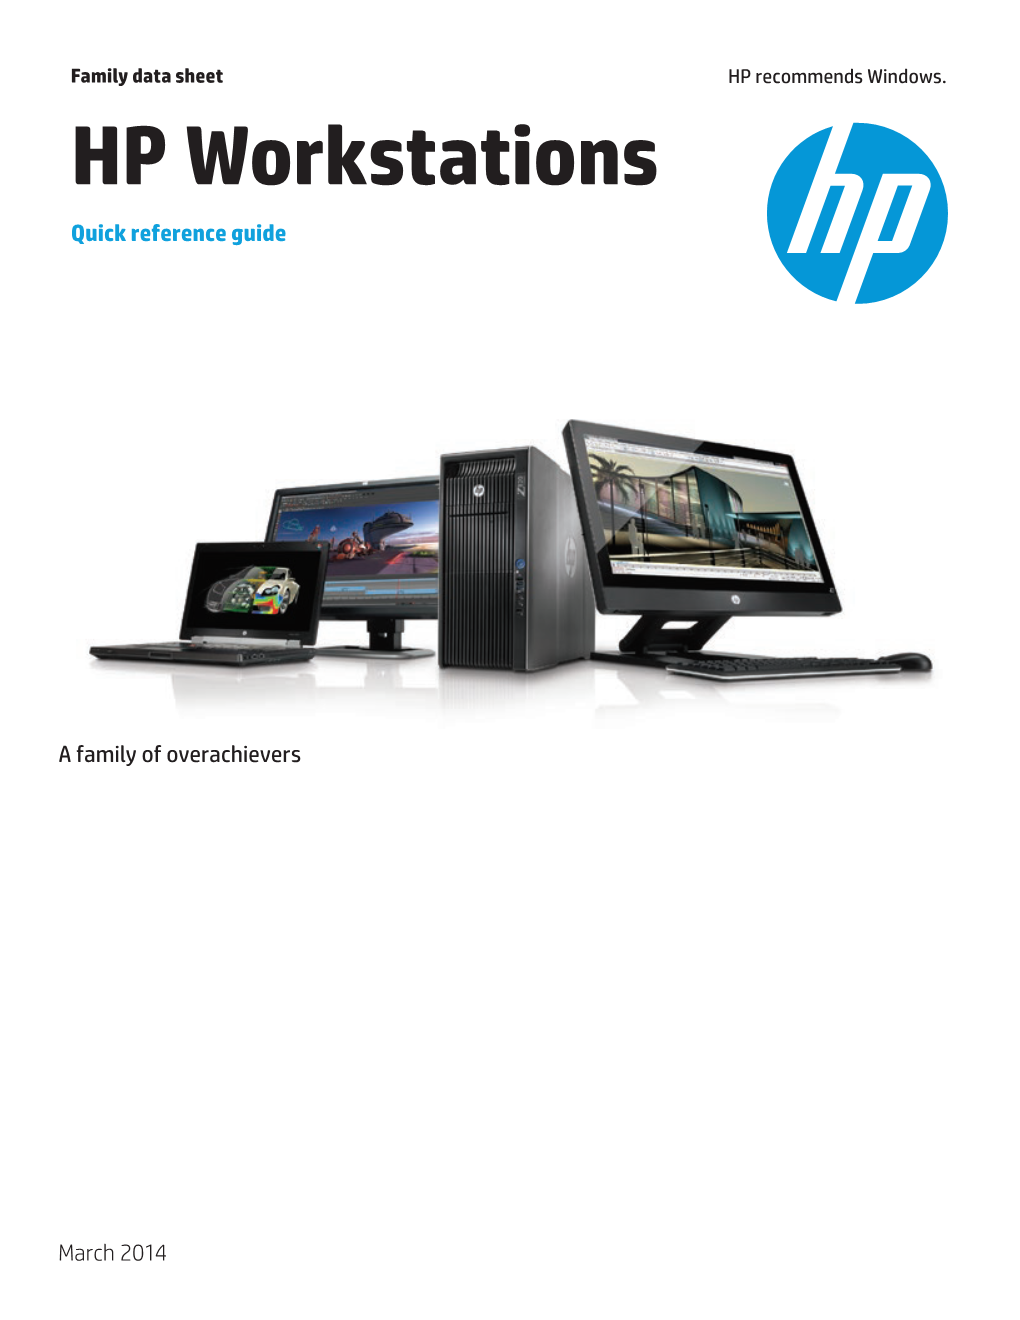 HP Workstations Quick Reference Guide